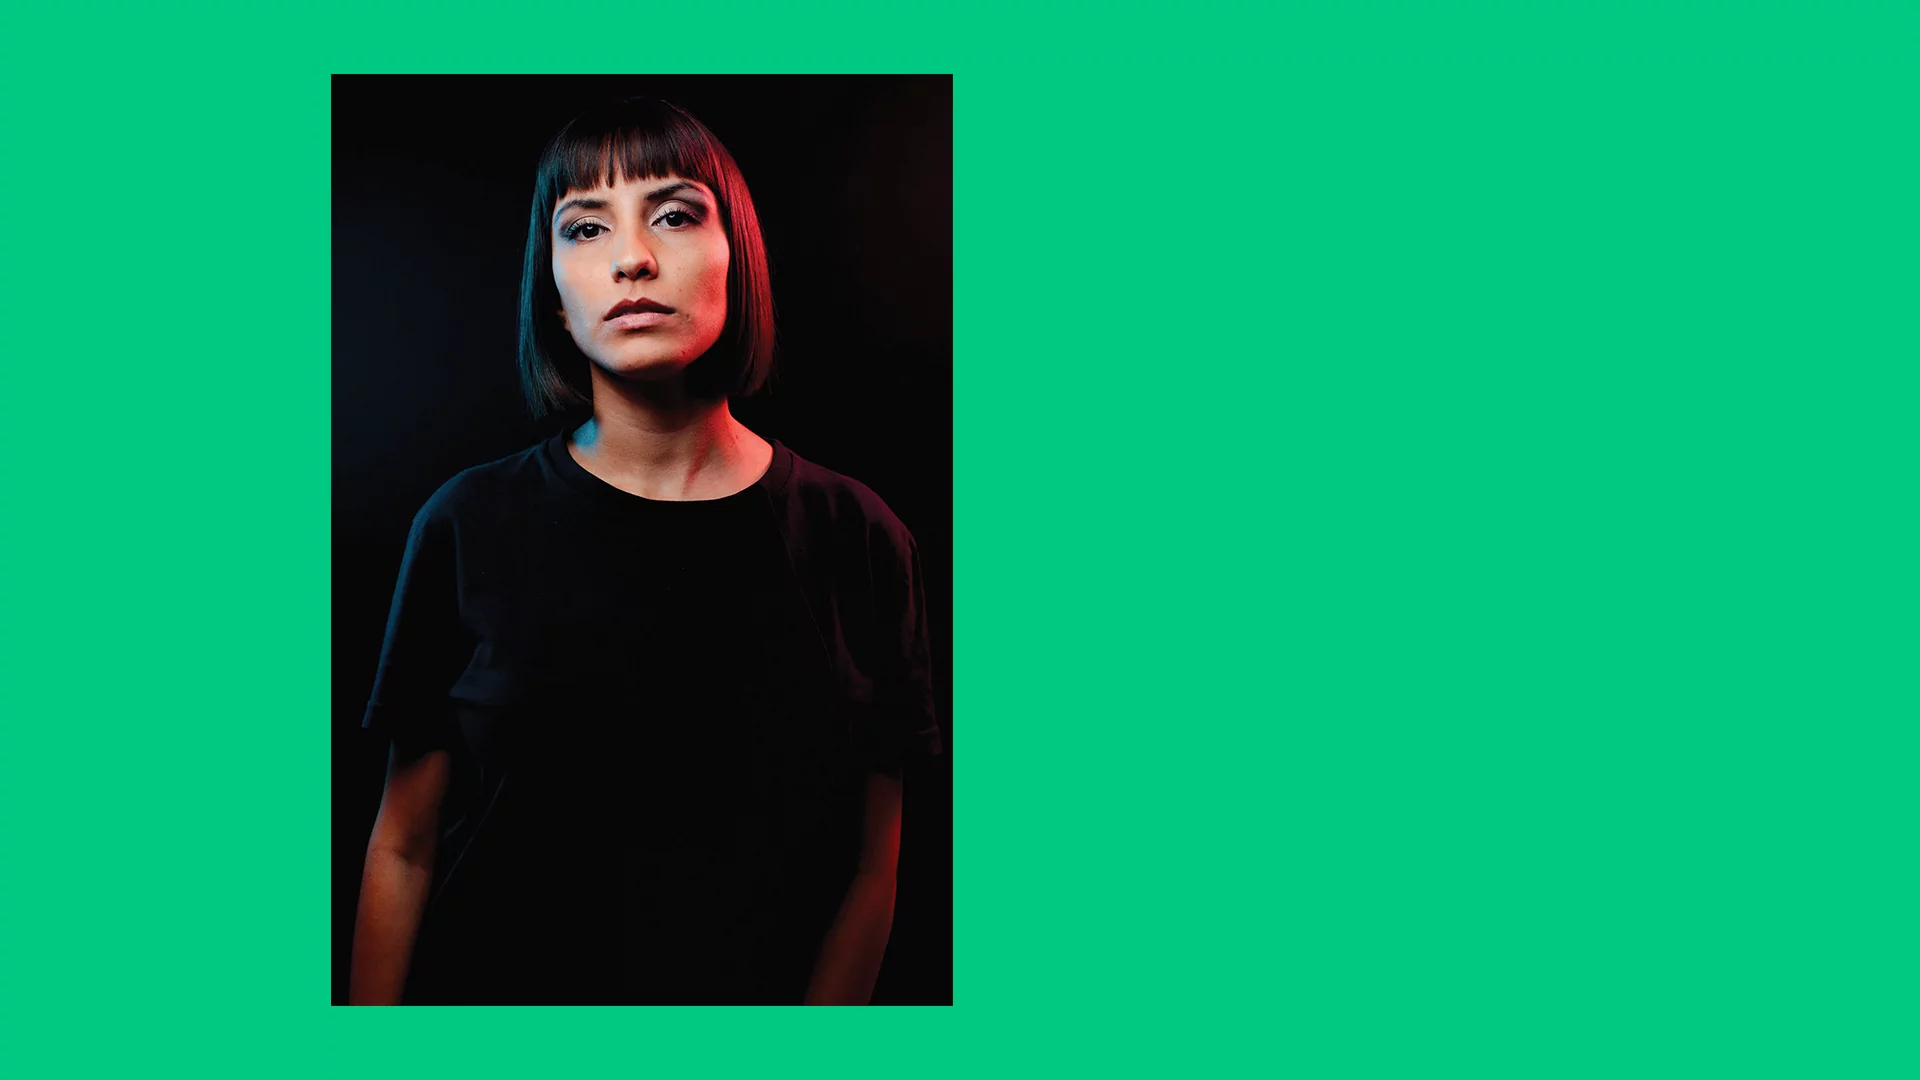 Photo of Constanza wearing all black on a green collage background